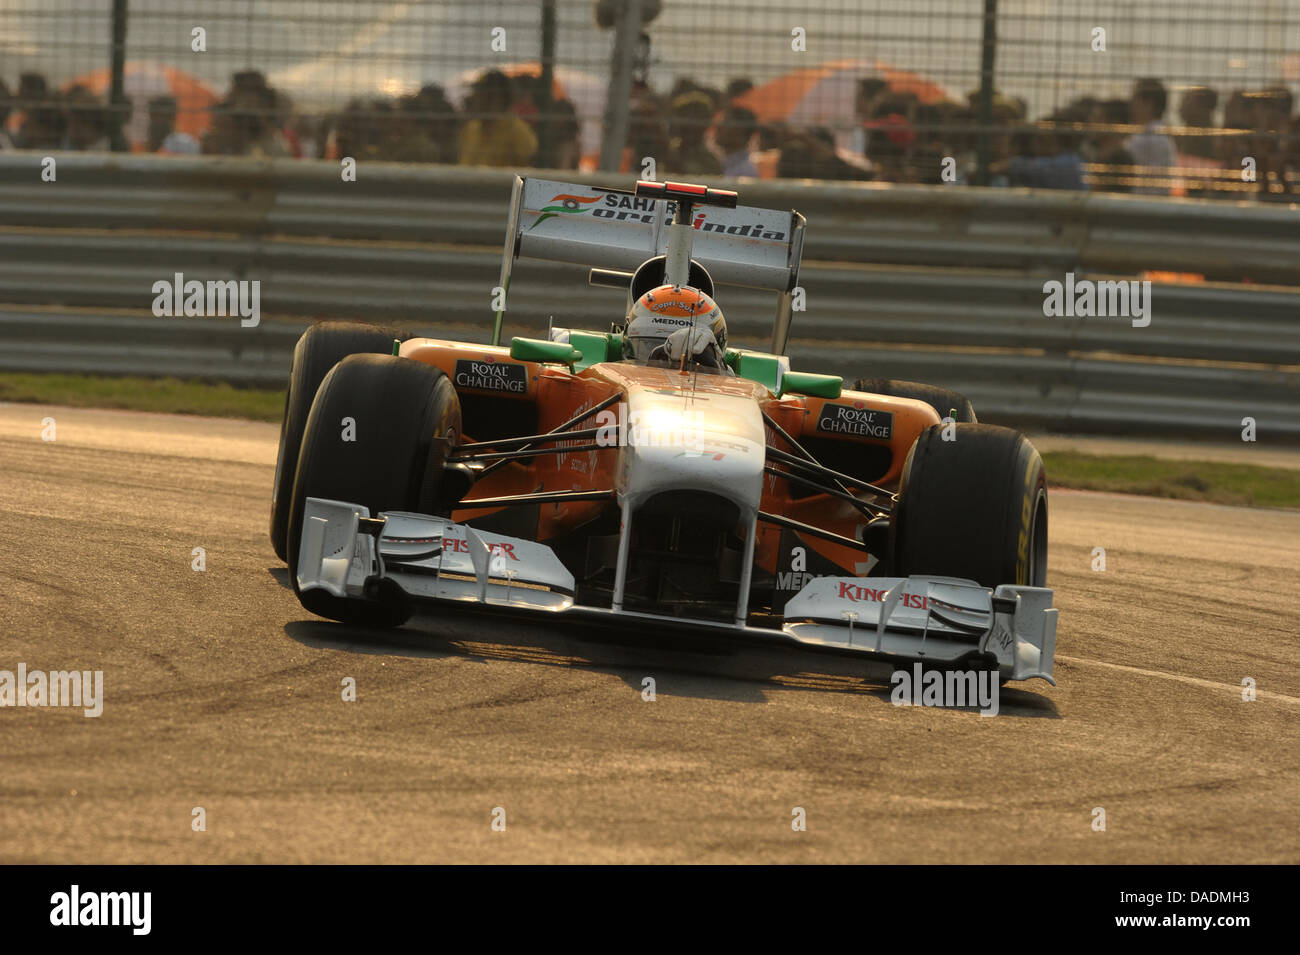 German Formula One driver Adrian Sutil of Force India steers his car during the race at the Buddh International Circuit, Greater Noida, India, 30 October 2011. Photo: David Ebener dpa Stock Photo